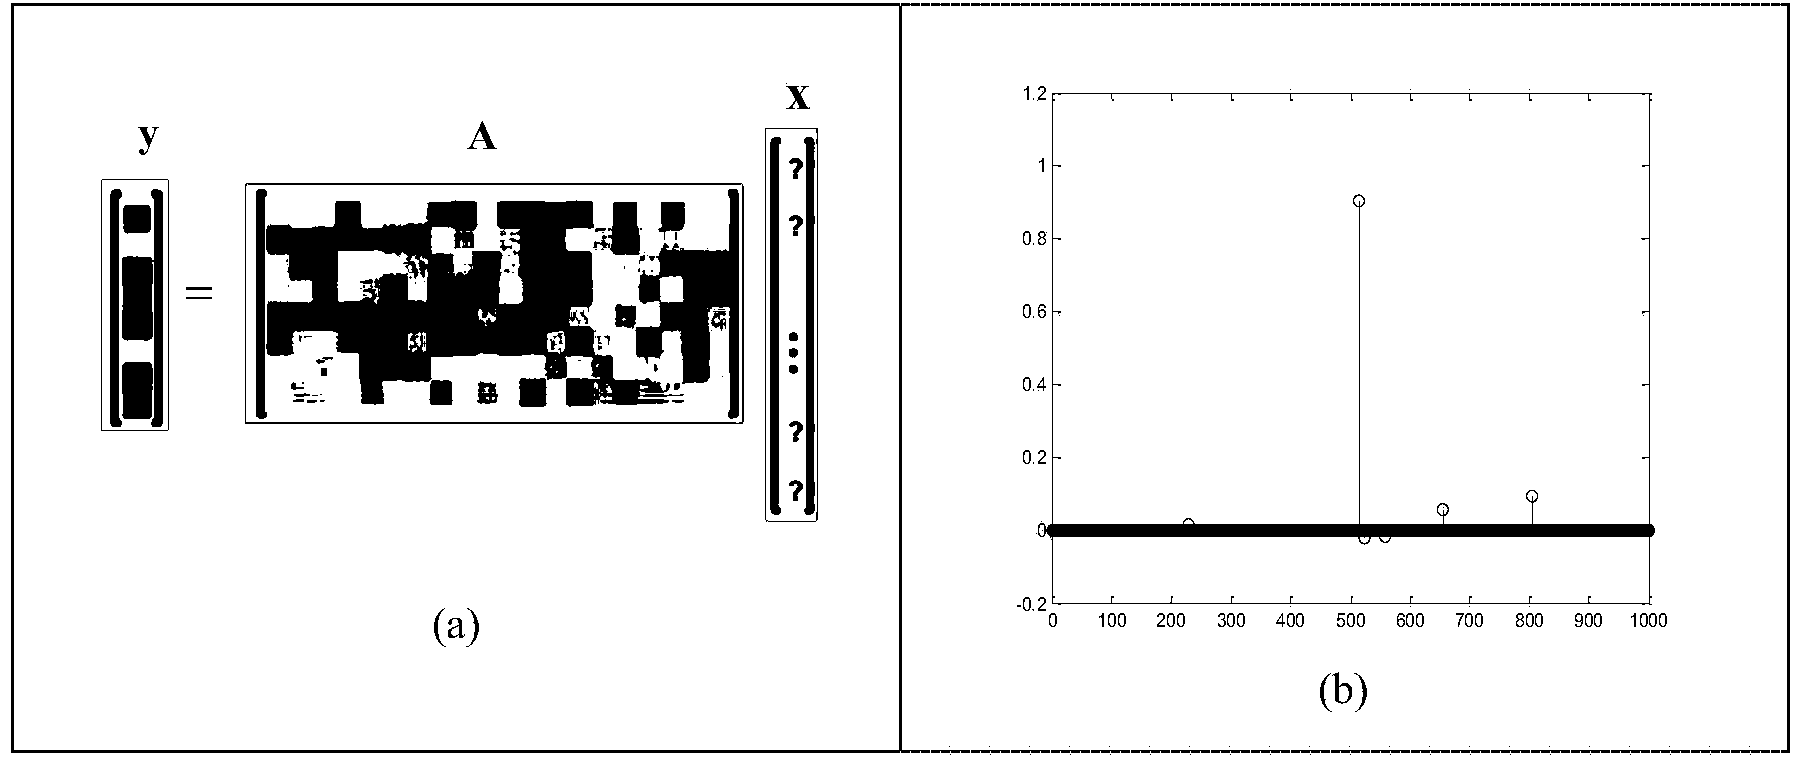 SAR image search method based on sparse coding classification